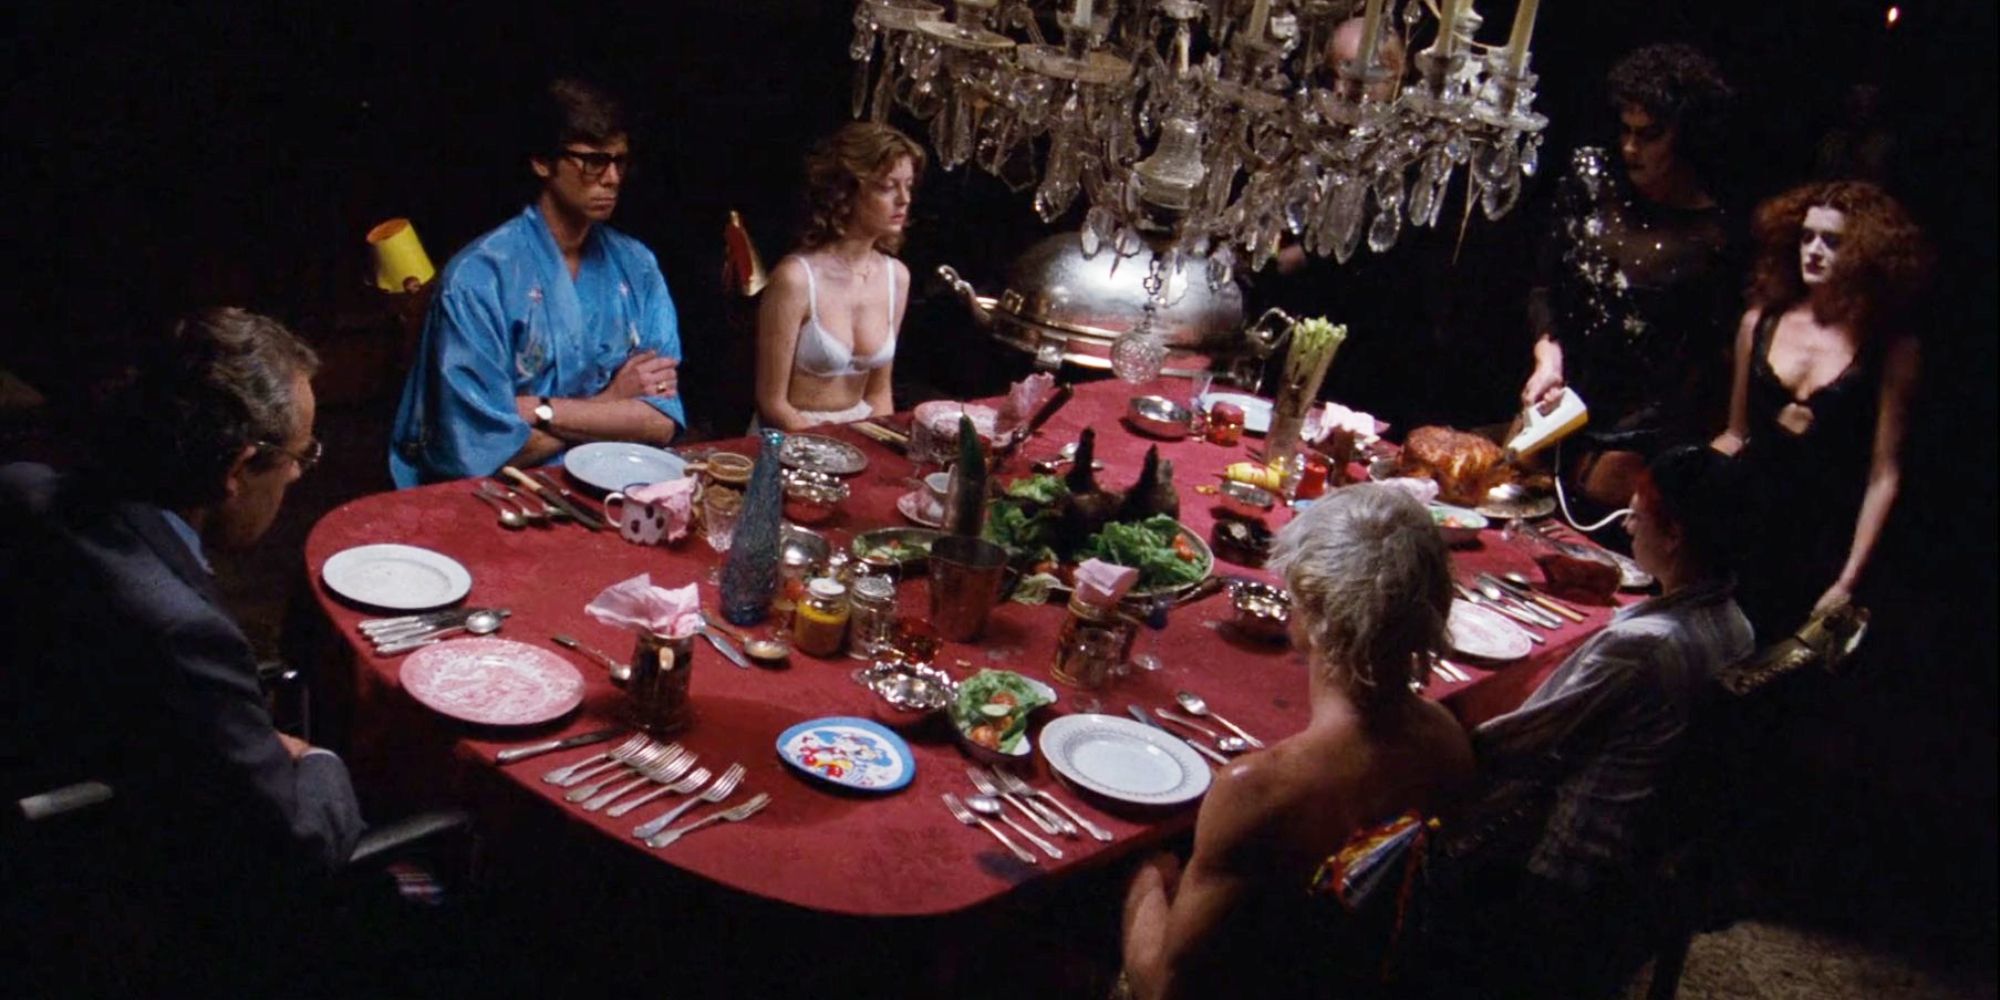 The Rocky Horror Picture Show - dinner